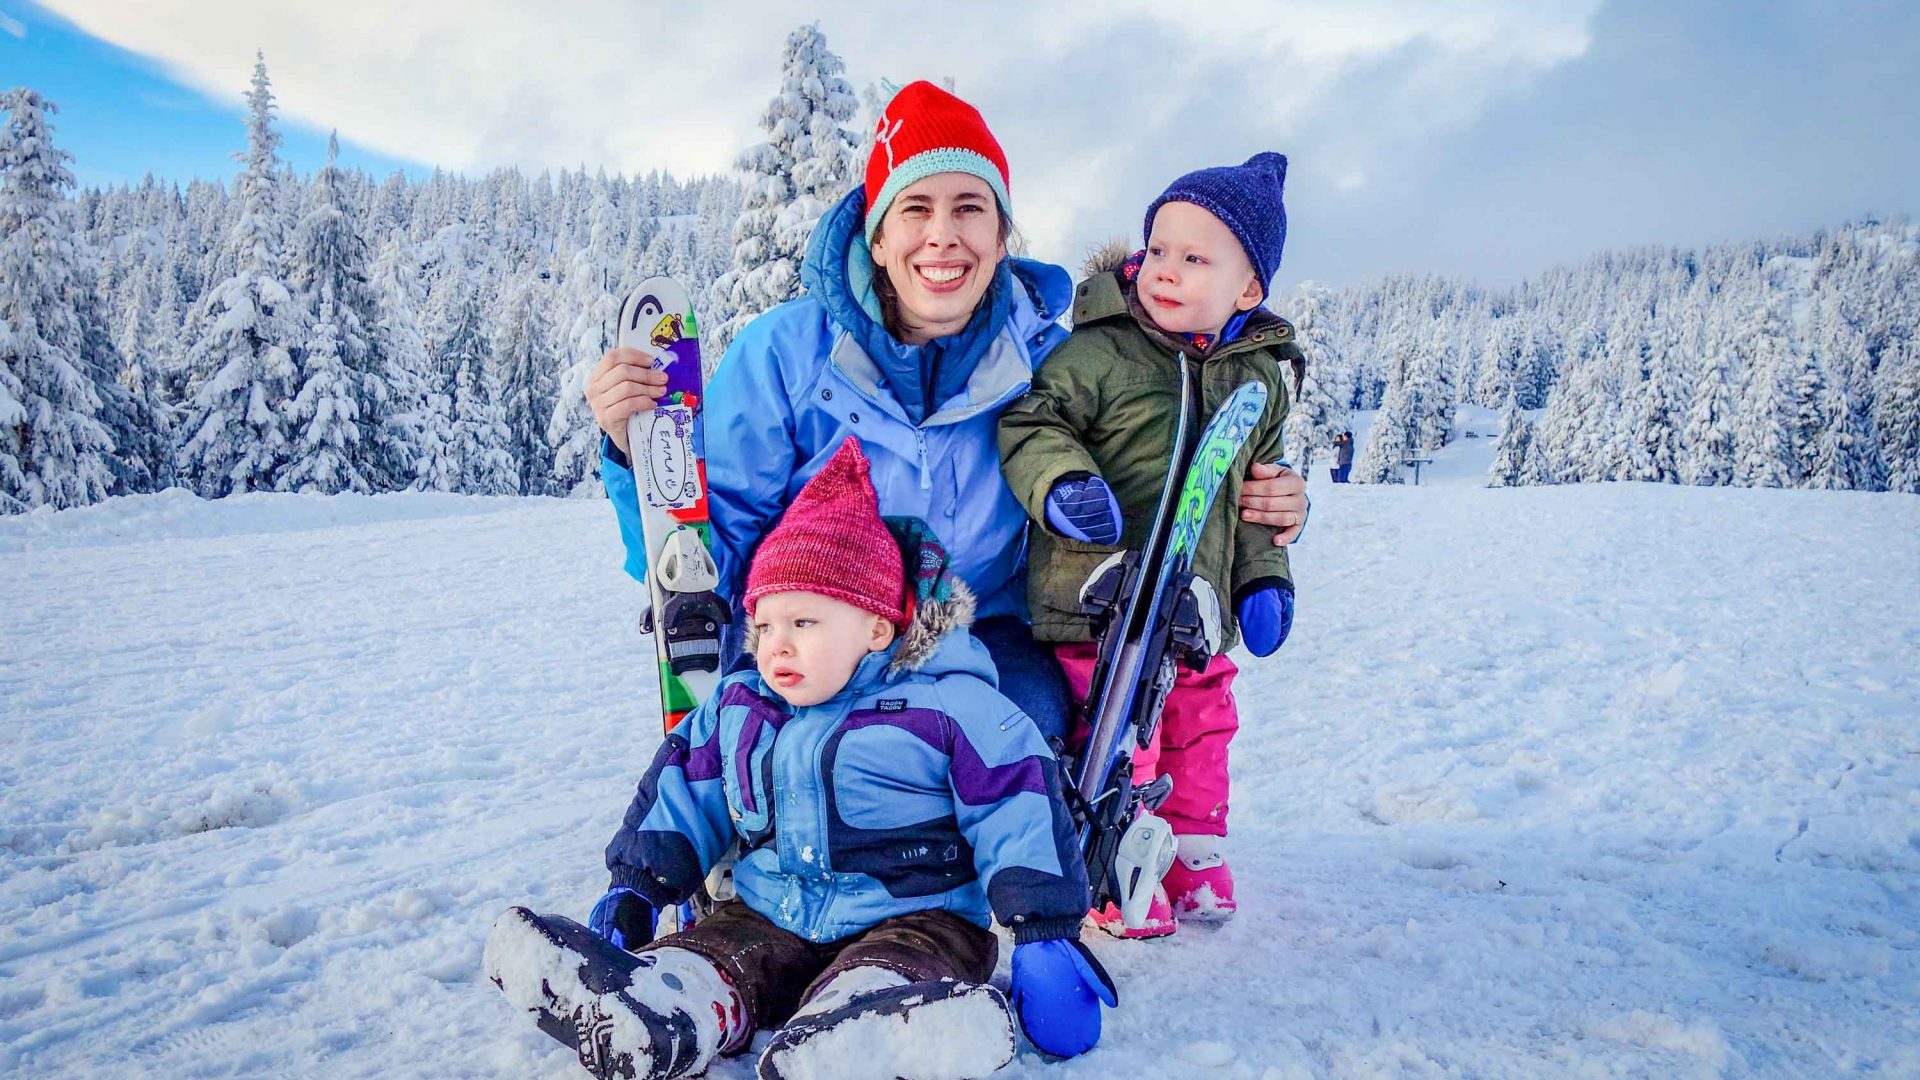 Katie Teed with her twins Colin and Addison on their first ski trip.